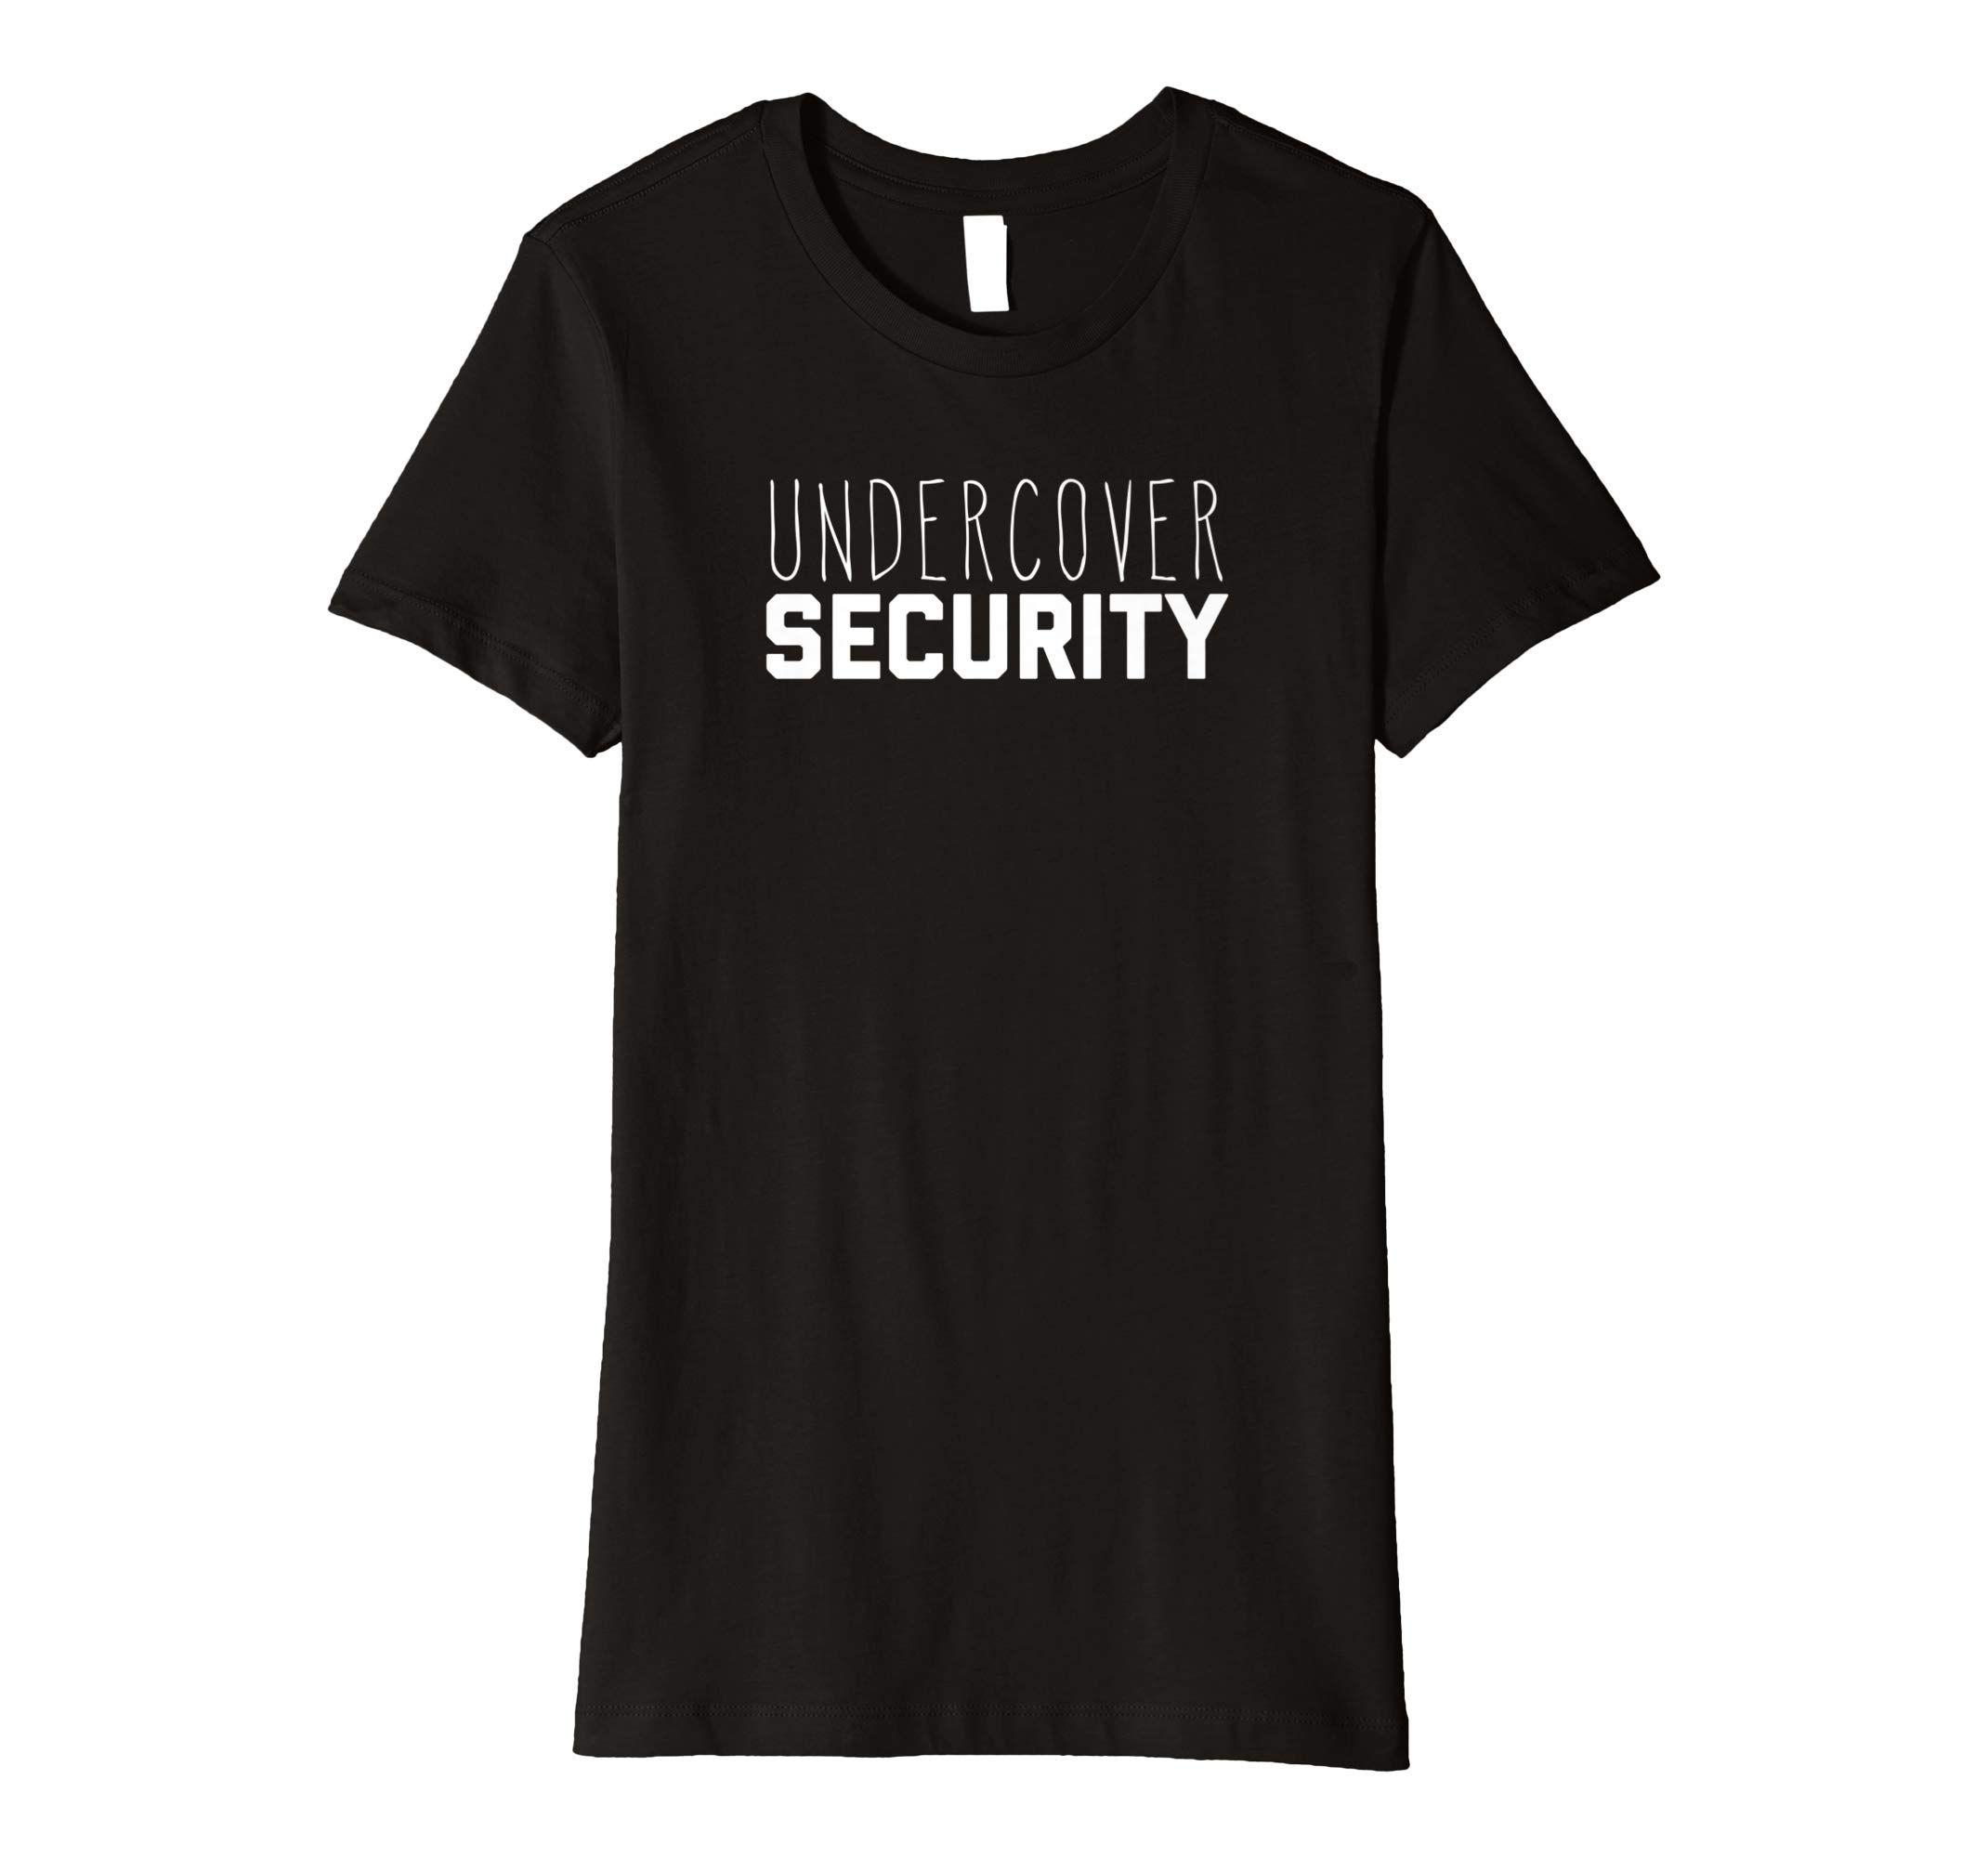 Undercover Security Logo - Undercover Security Shirt: Clothing